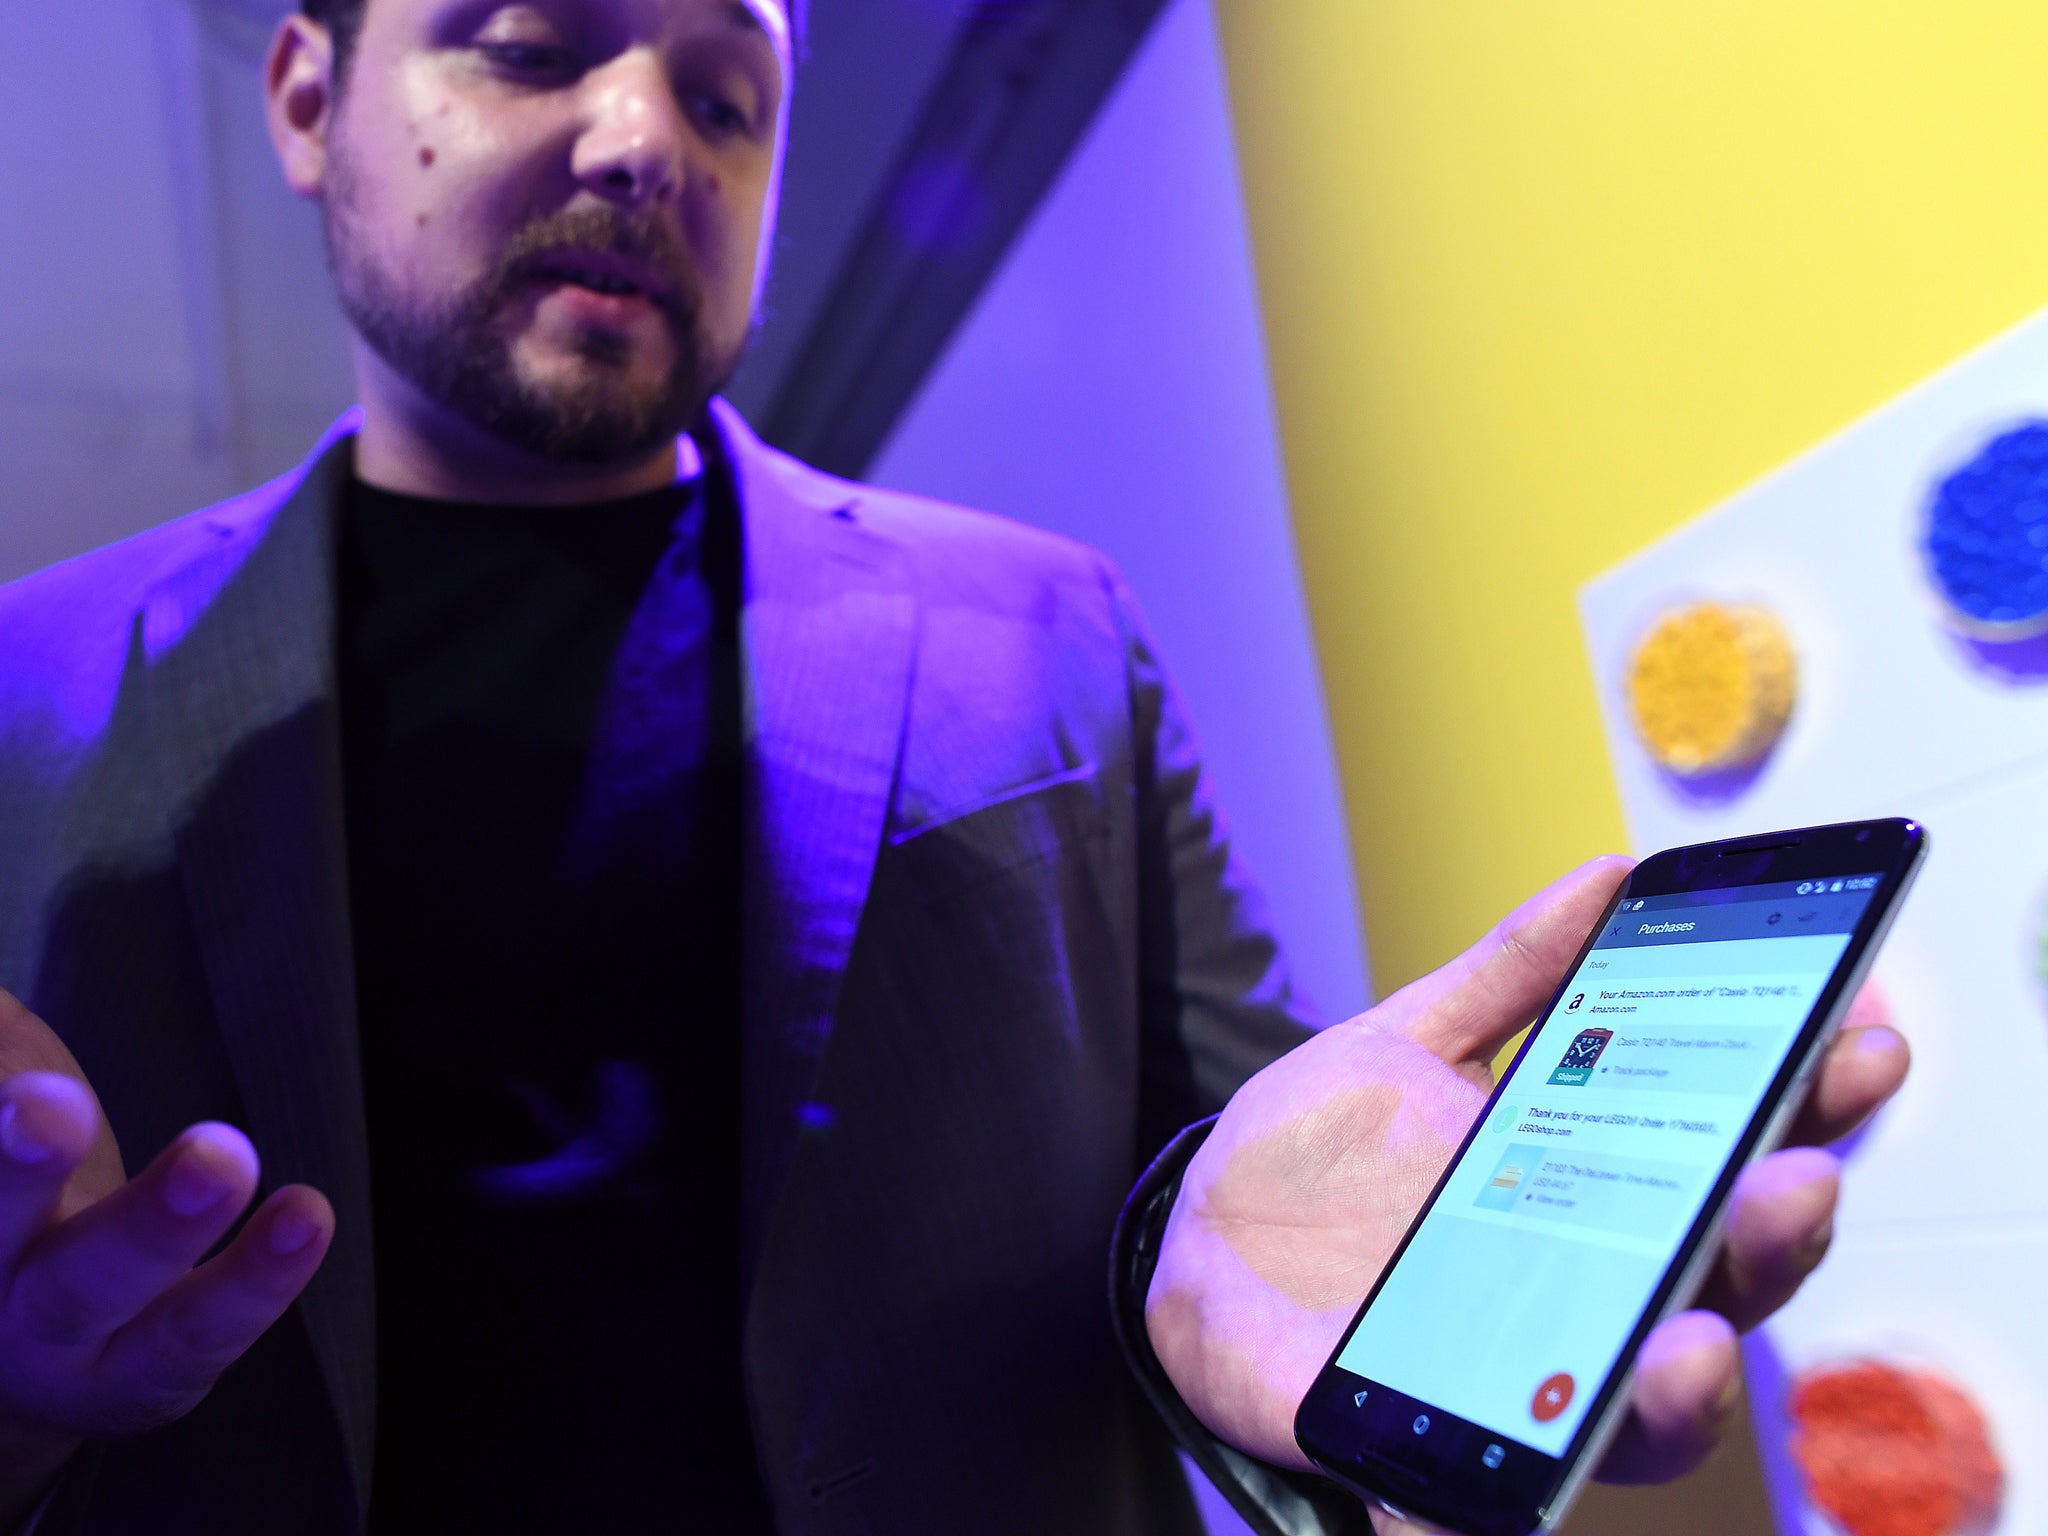 Google's lead designer for 'Inbox by Gmail' Jason Cornwell shows the app's functionalities on a nexus 6 android phone during a media preview in New York on October 29, 2014